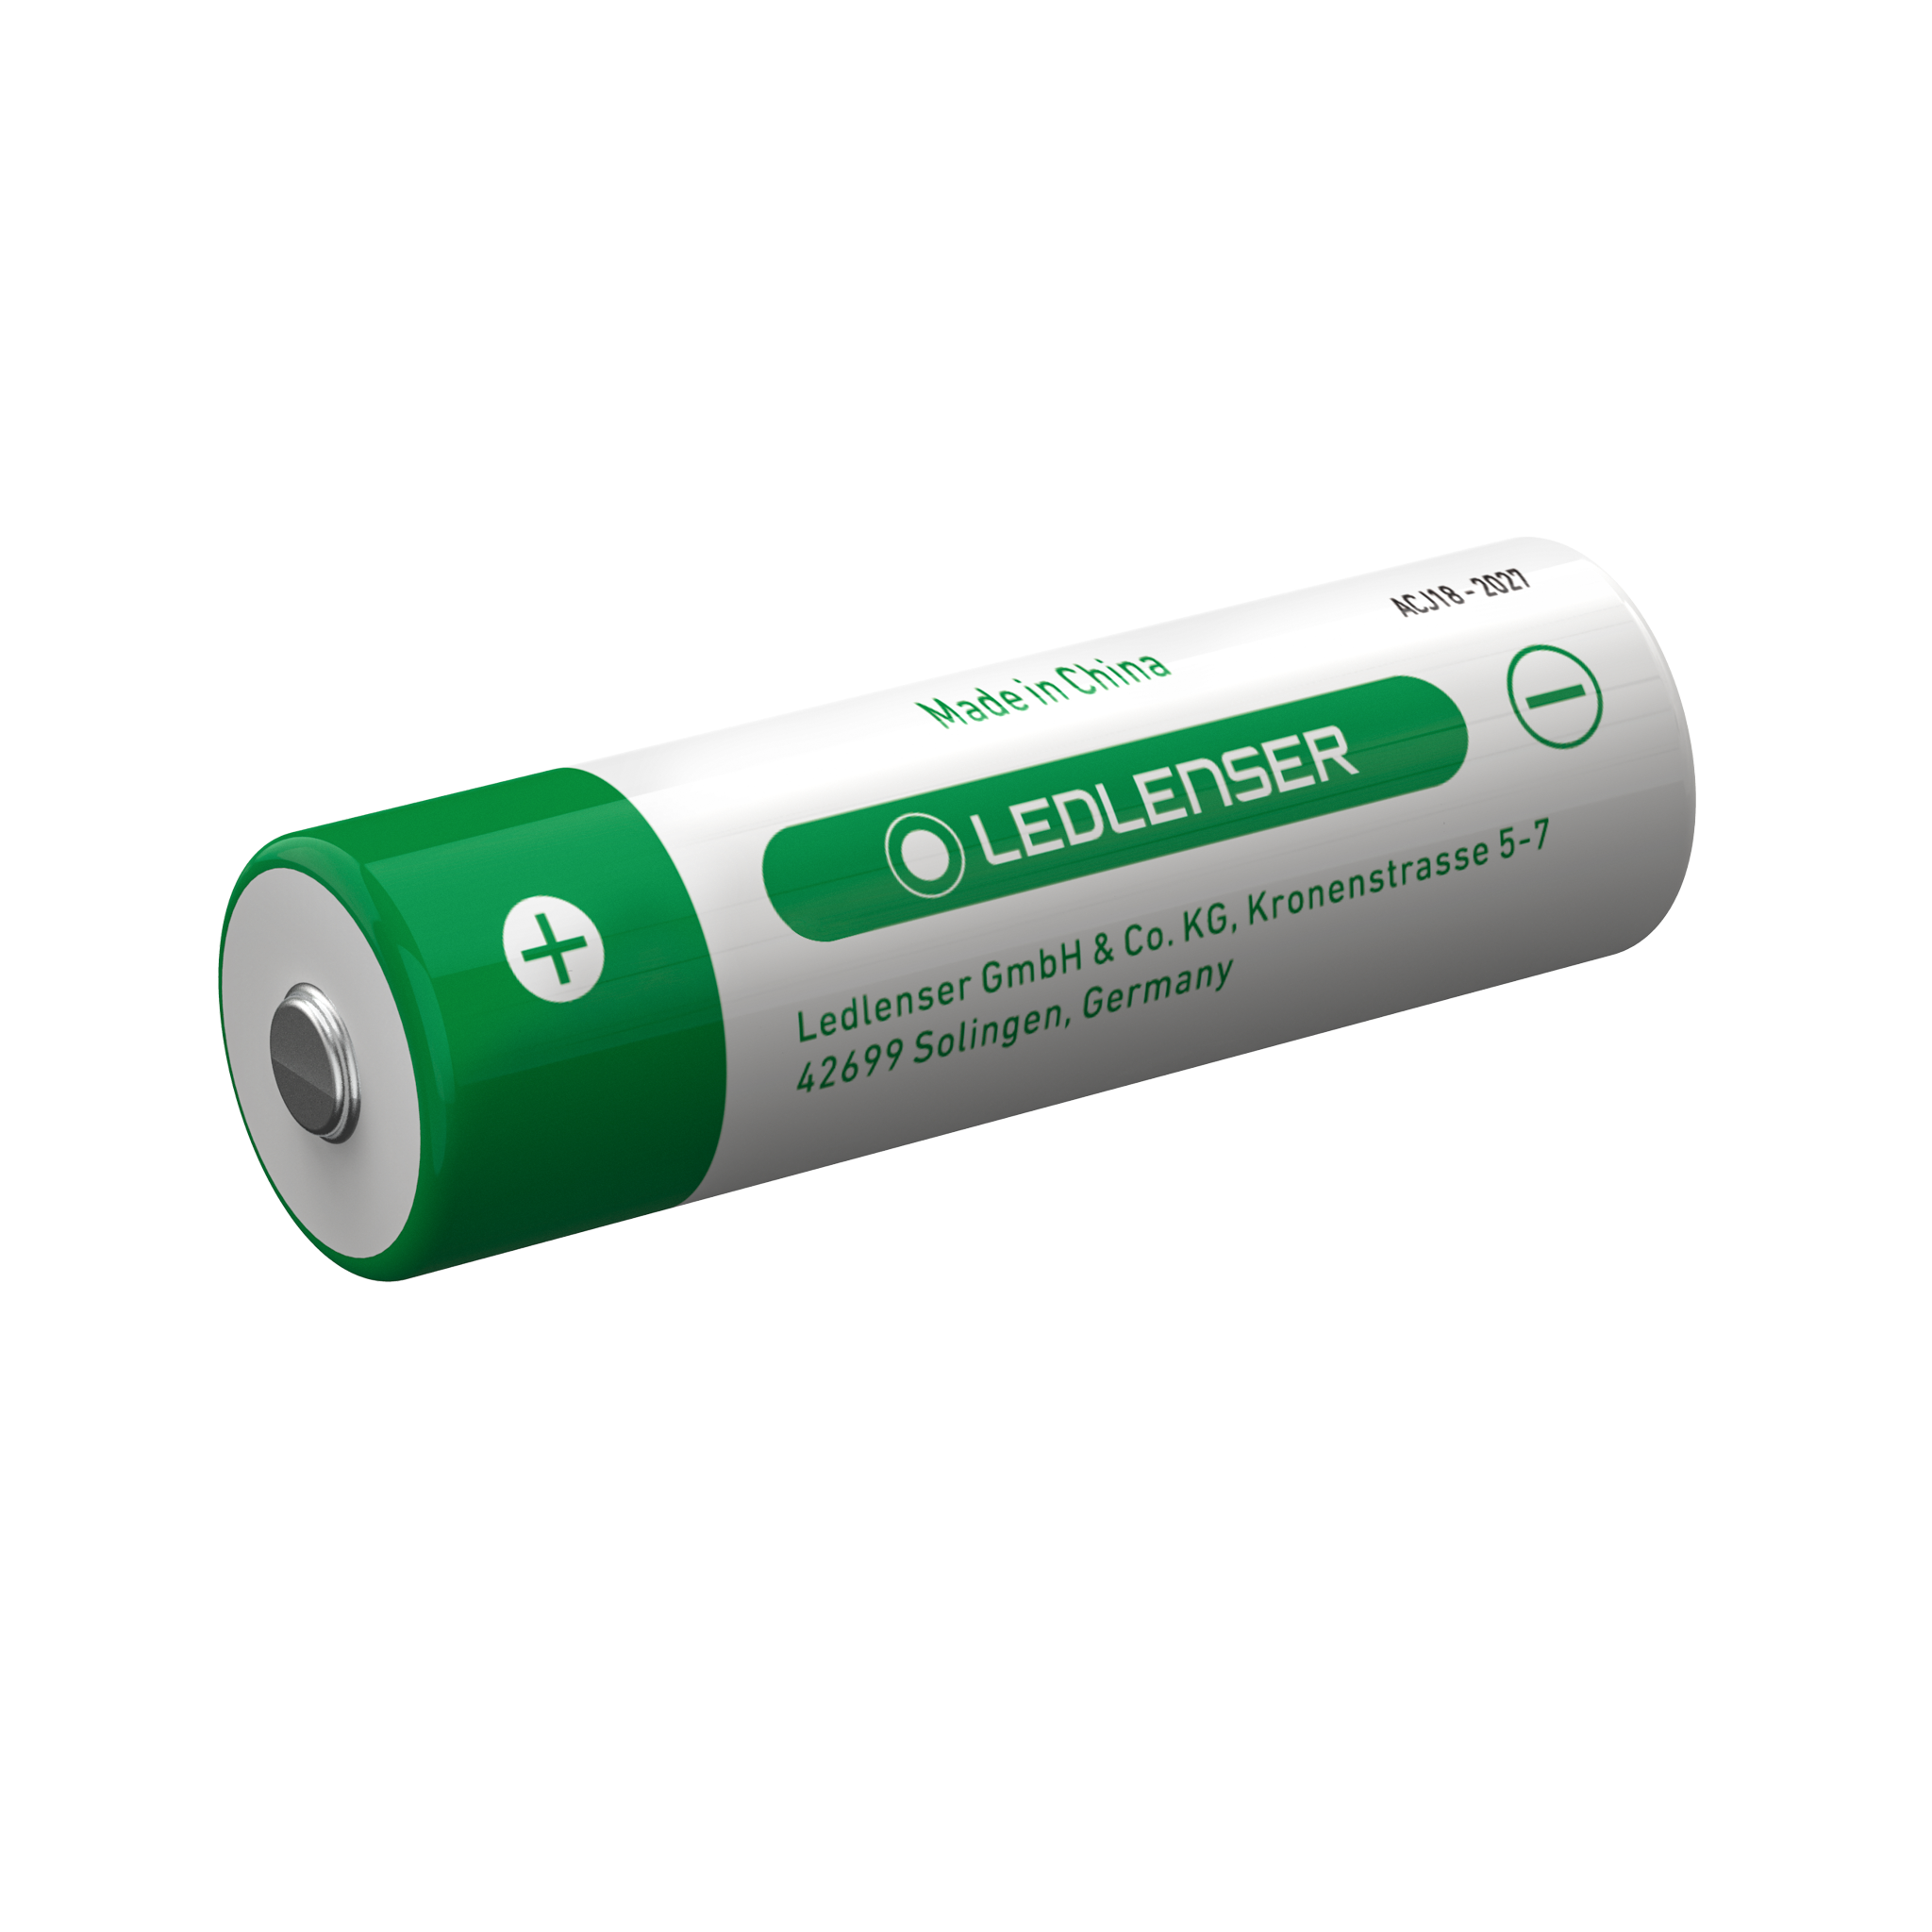 Rechargeable 21700 Li-ion Battery | Suits H7R, P7R Core & P7R Work UV, Signature & Work Series